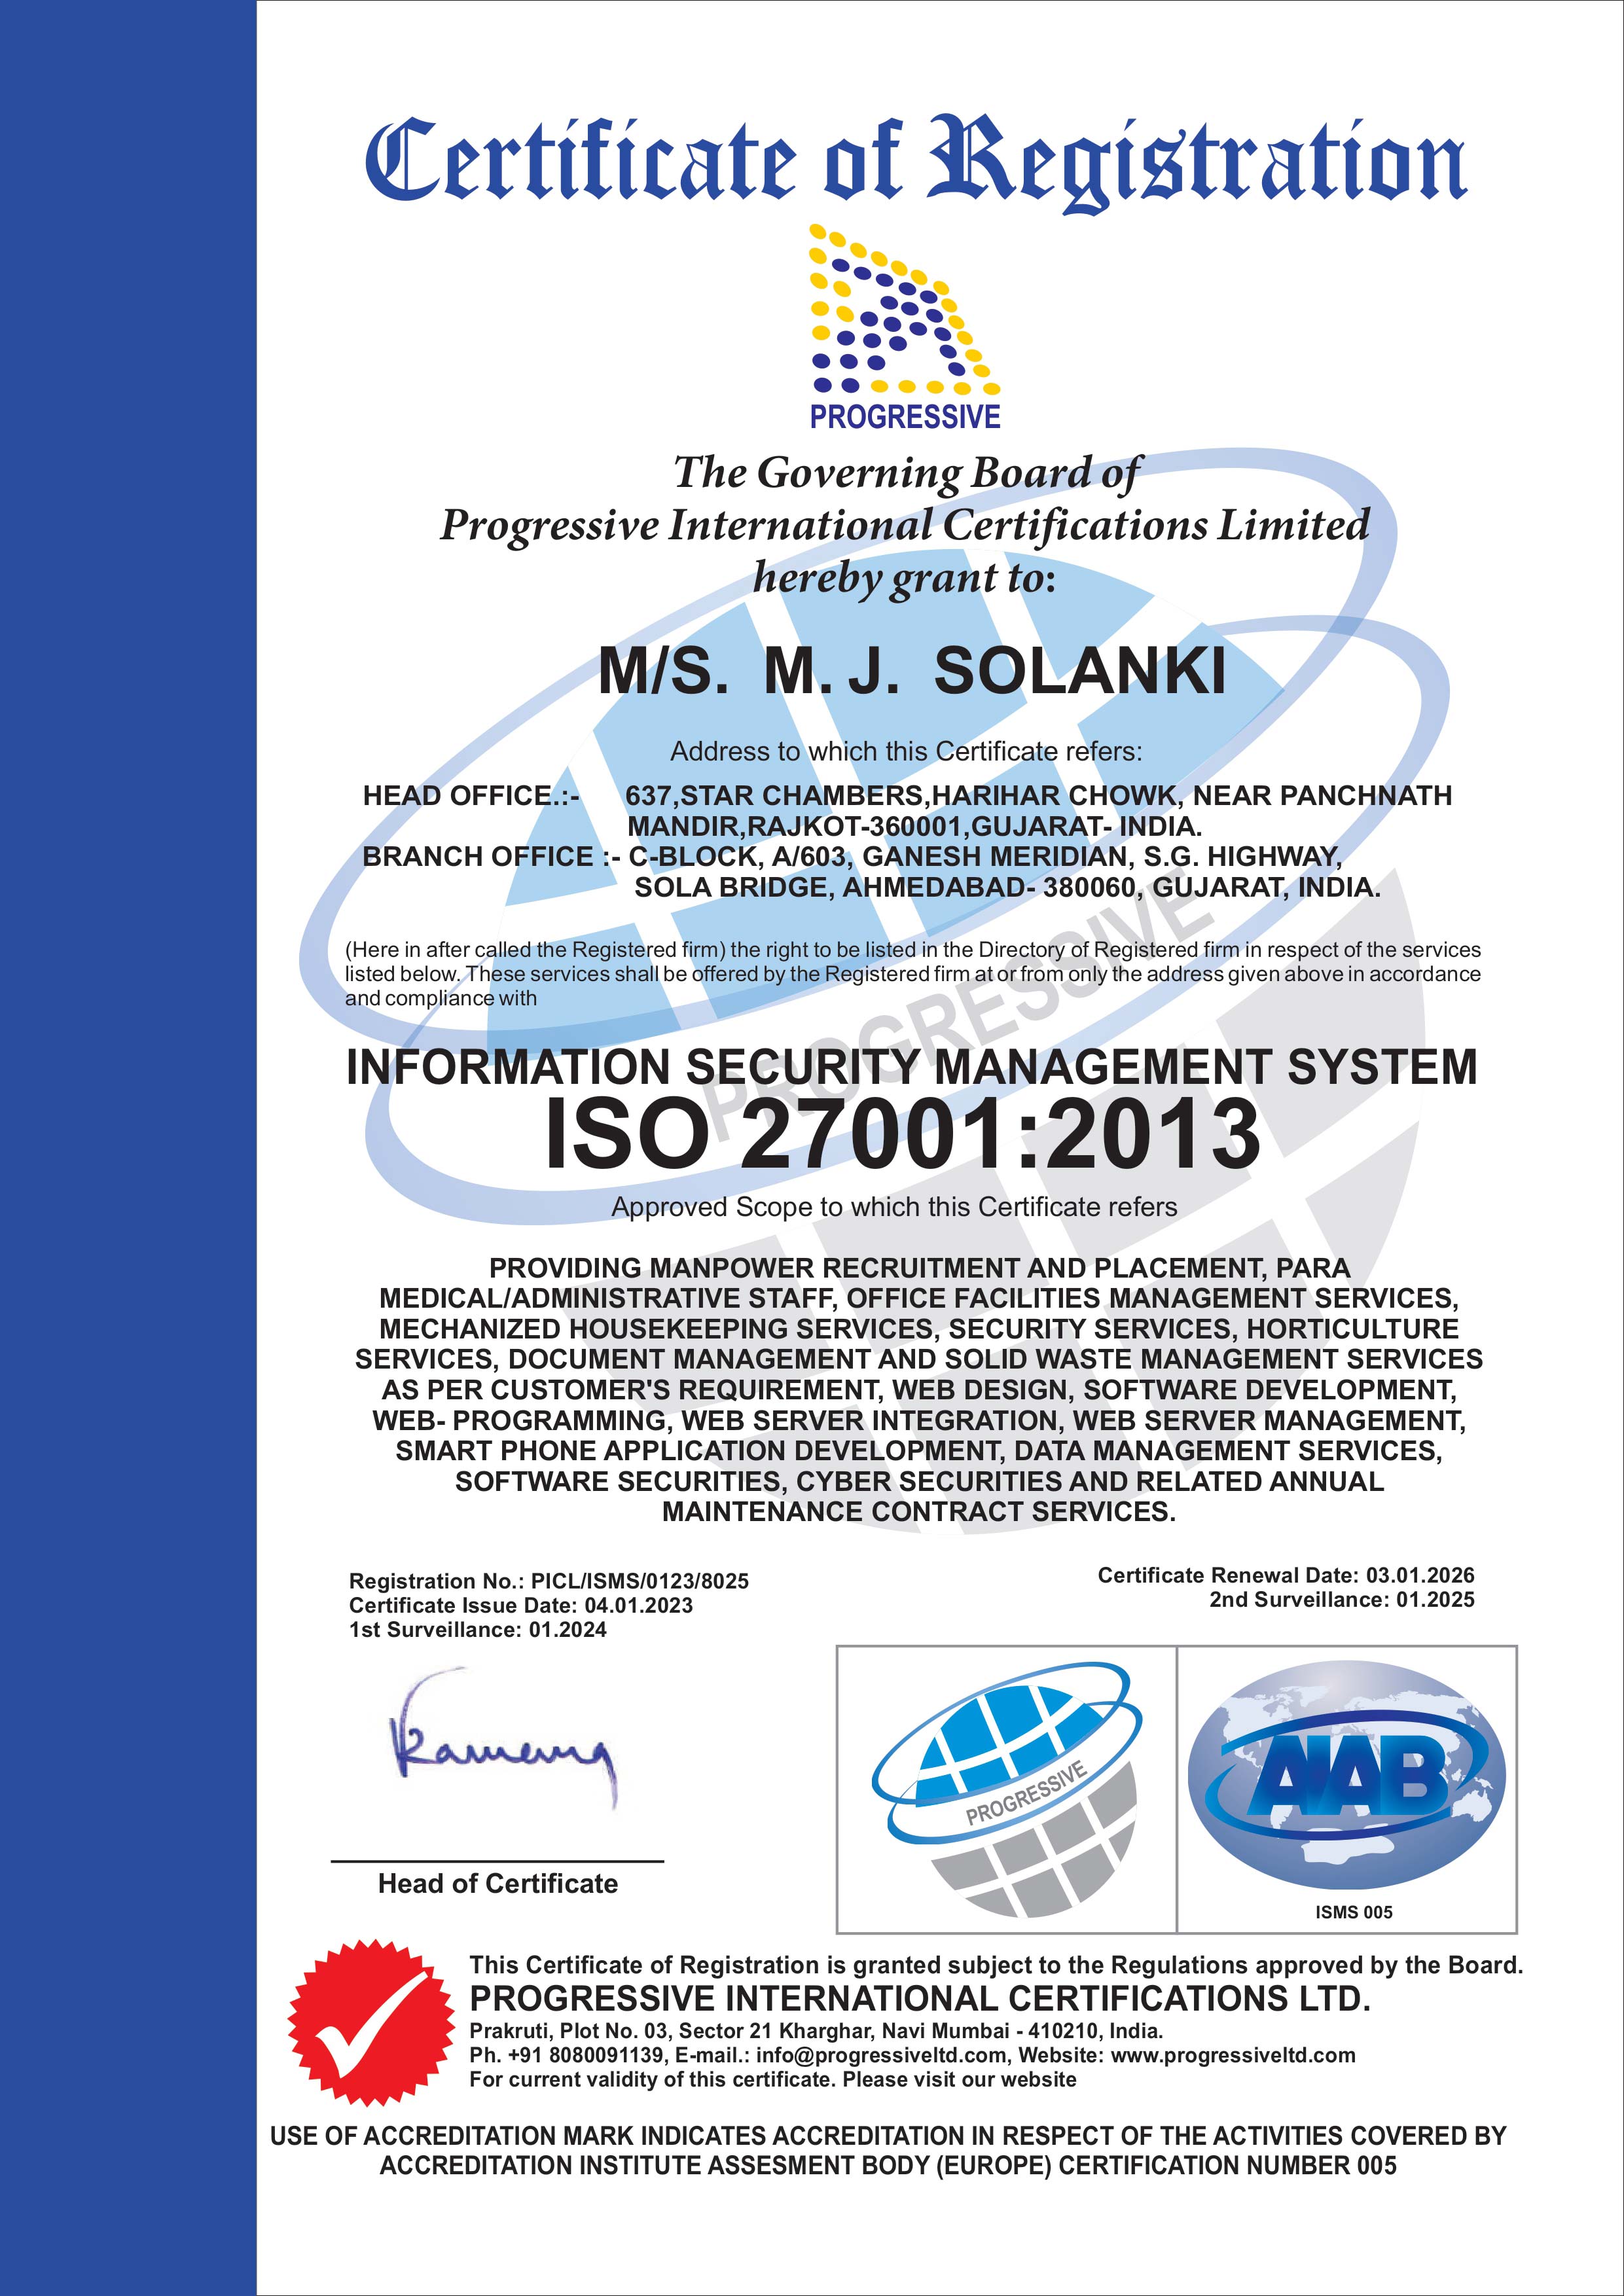 Information Security Management System Certificate Image